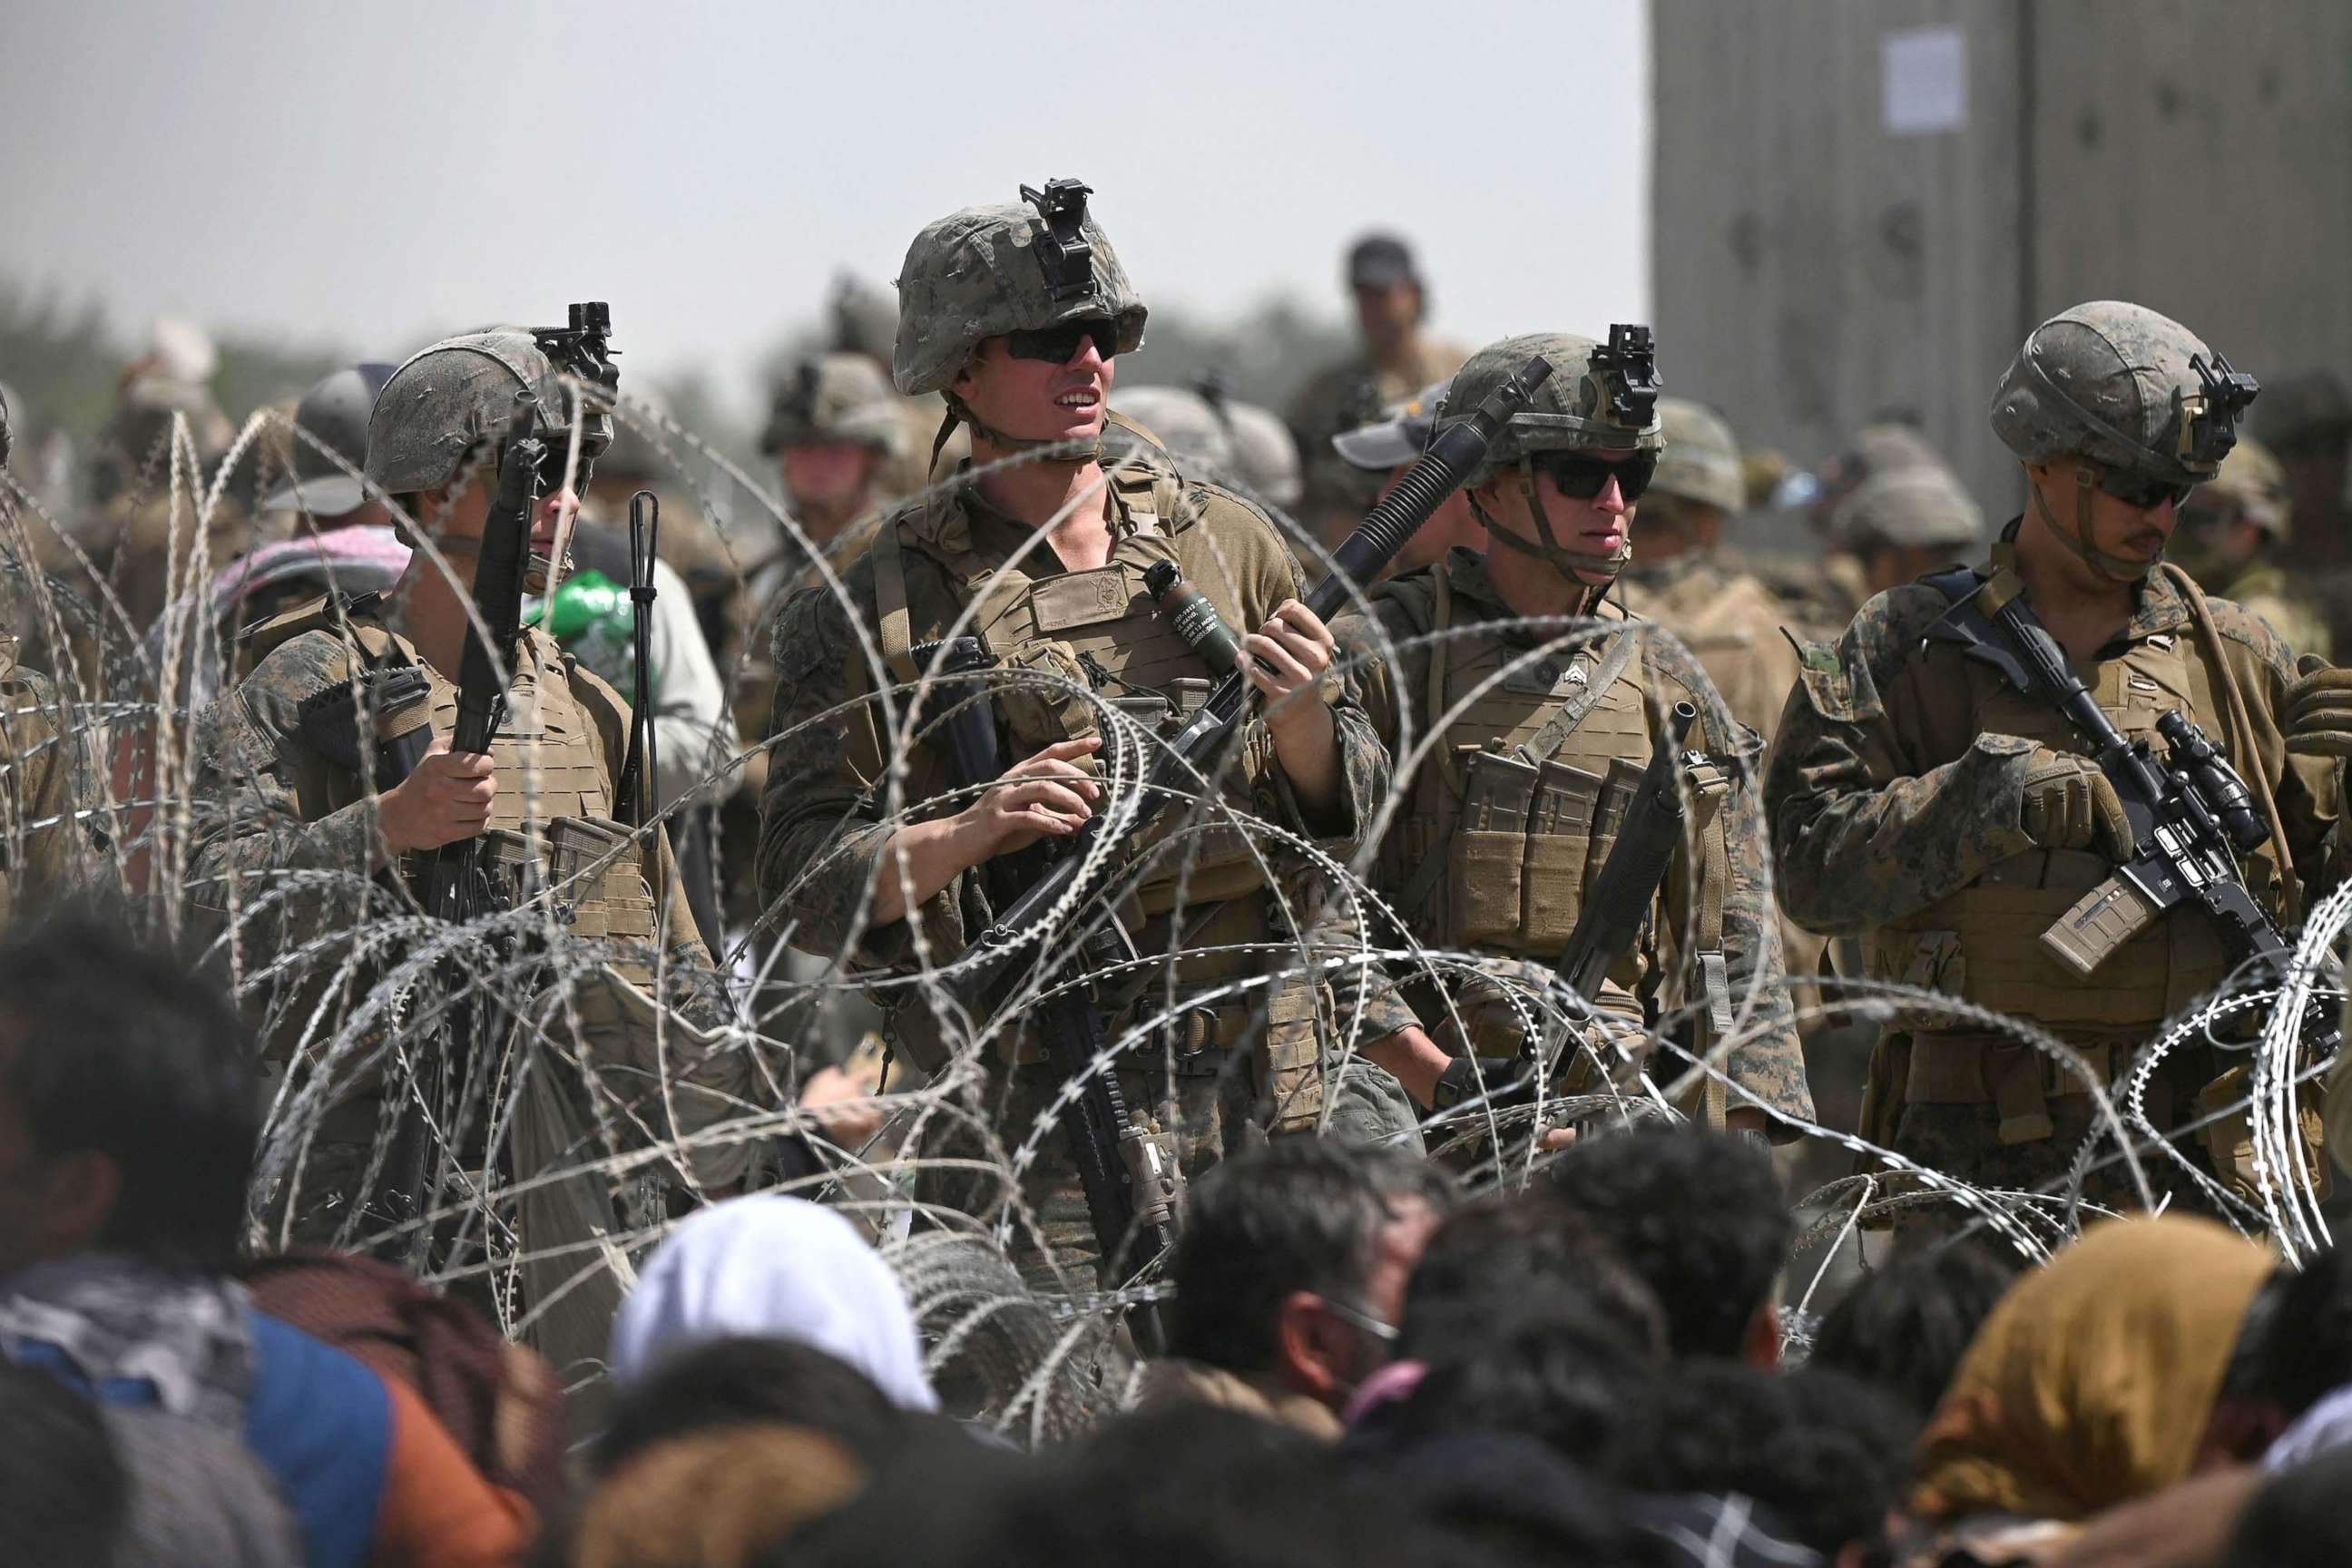 PHOTO: U.S. soldiers stand guard behind barbed wire as Afghans sit on a roadside near the military part of the airport in Kabul, Aug. 20, 2021, hoping to flee from the country after the Taliban's military takeover of Afghanistan.